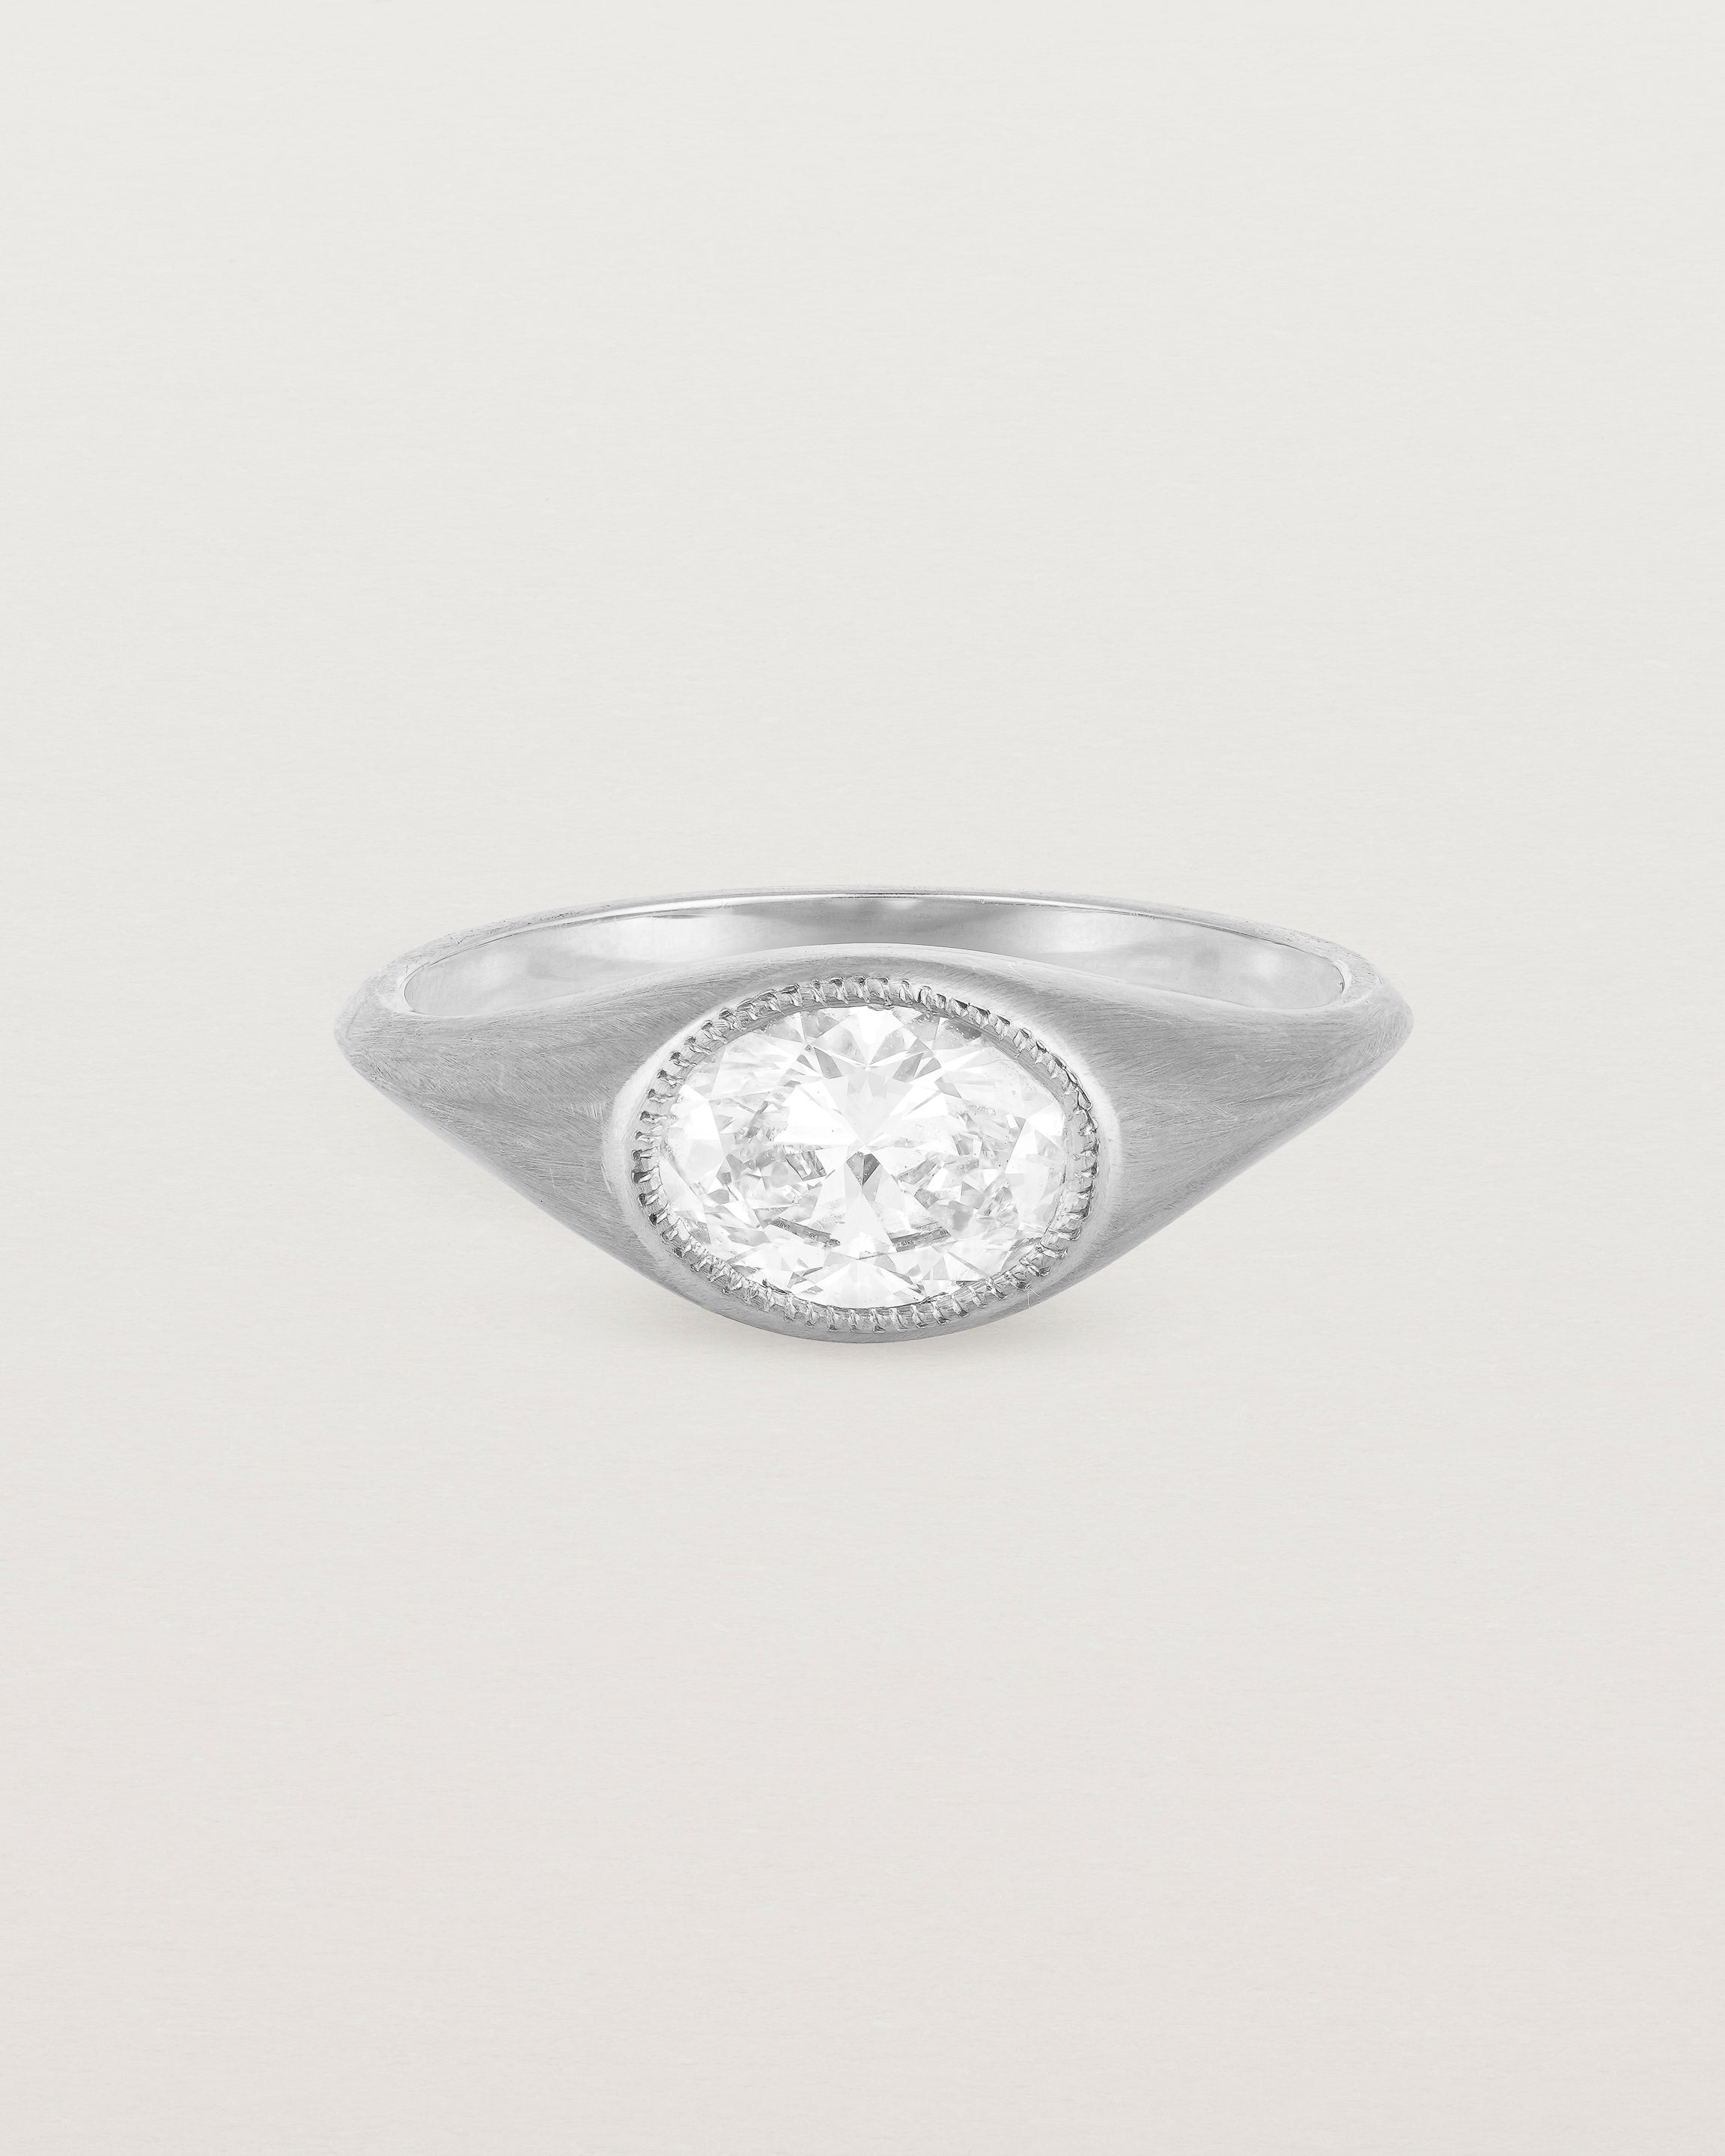 Front view of the Átlas Oval Signet | Laboratory Grown Diamond in white gold, with a matte finish. _label: Matte Finish Example